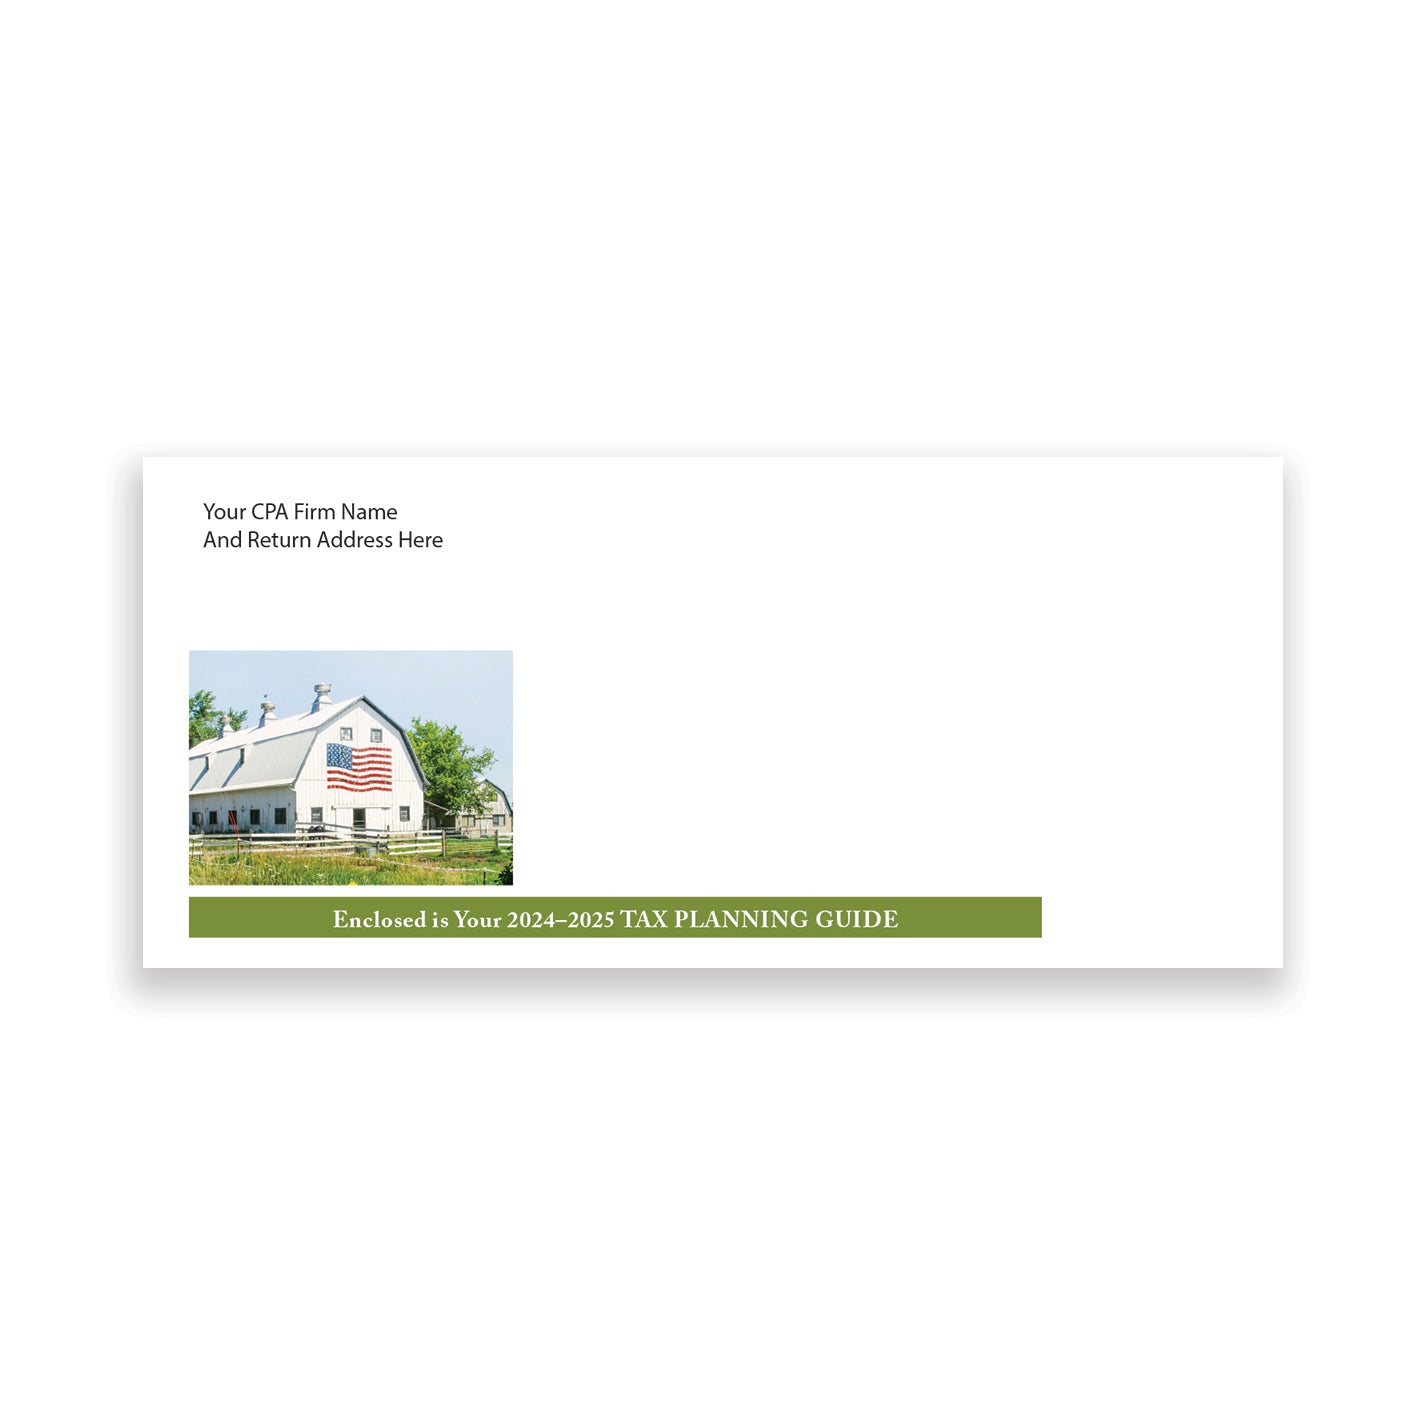 #10 Envelope For Small Tax Planning Guide